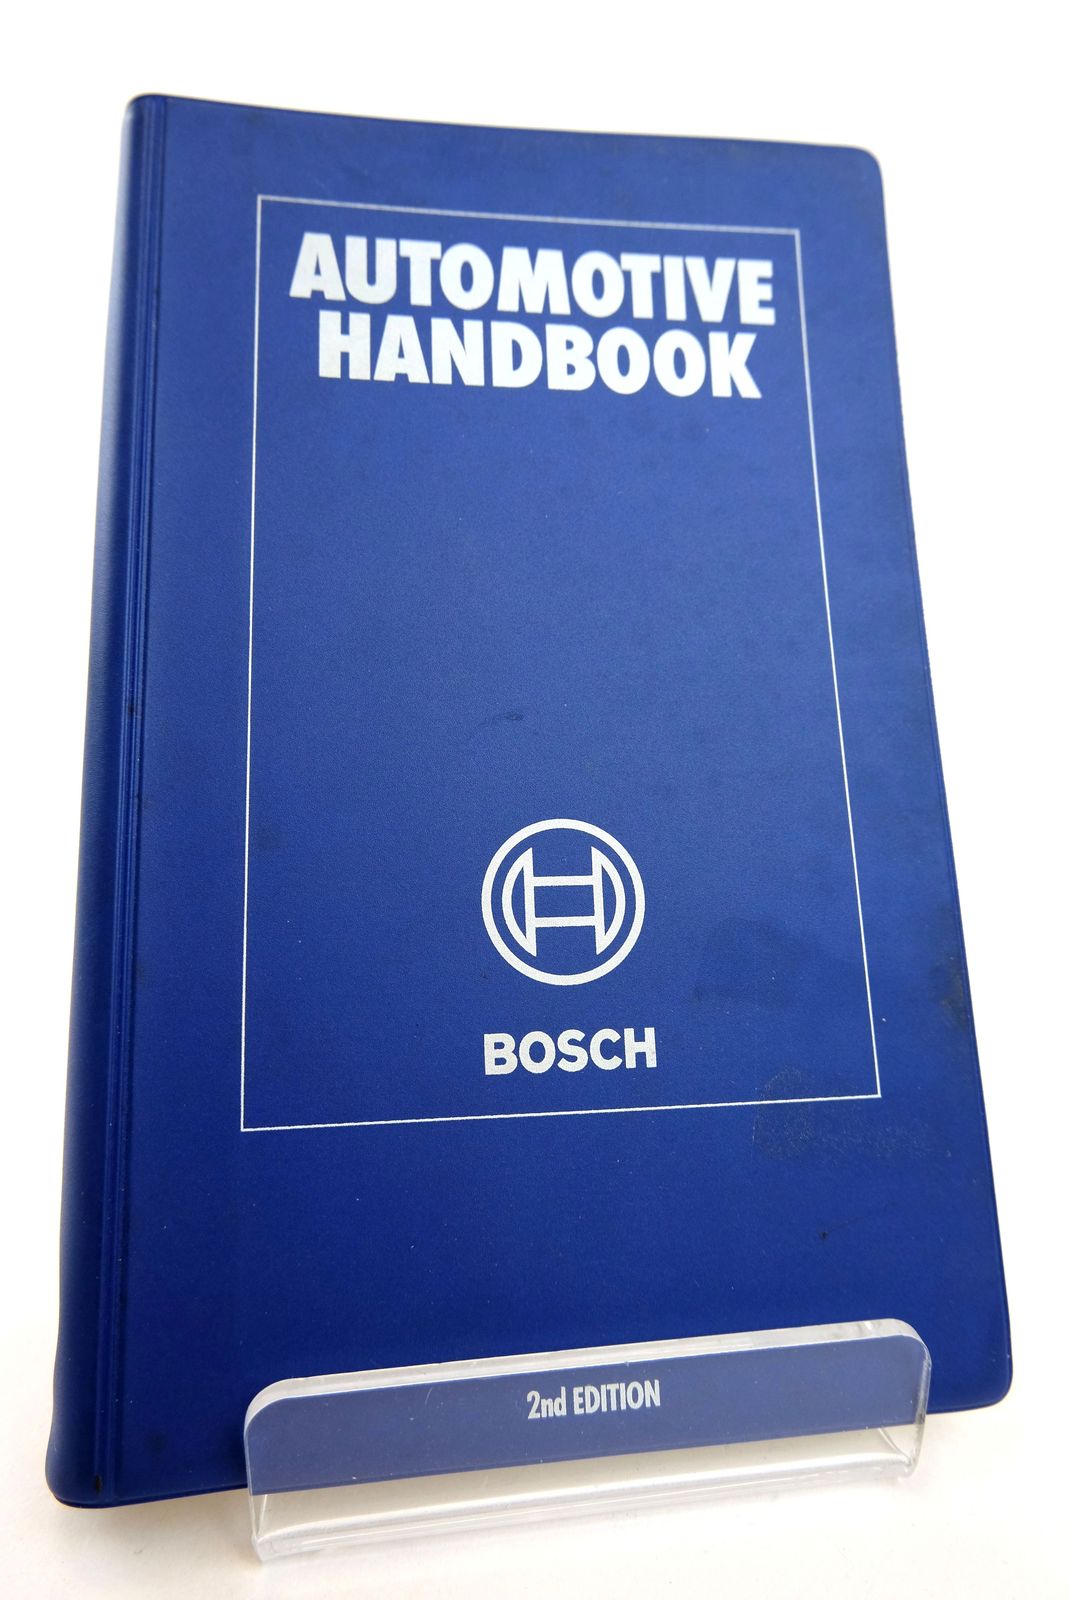 Photo of AUTOMOTIVE HANDBOOK published by Bosch (STOCK CODE: 1818832)  for sale by Stella & Rose's Books